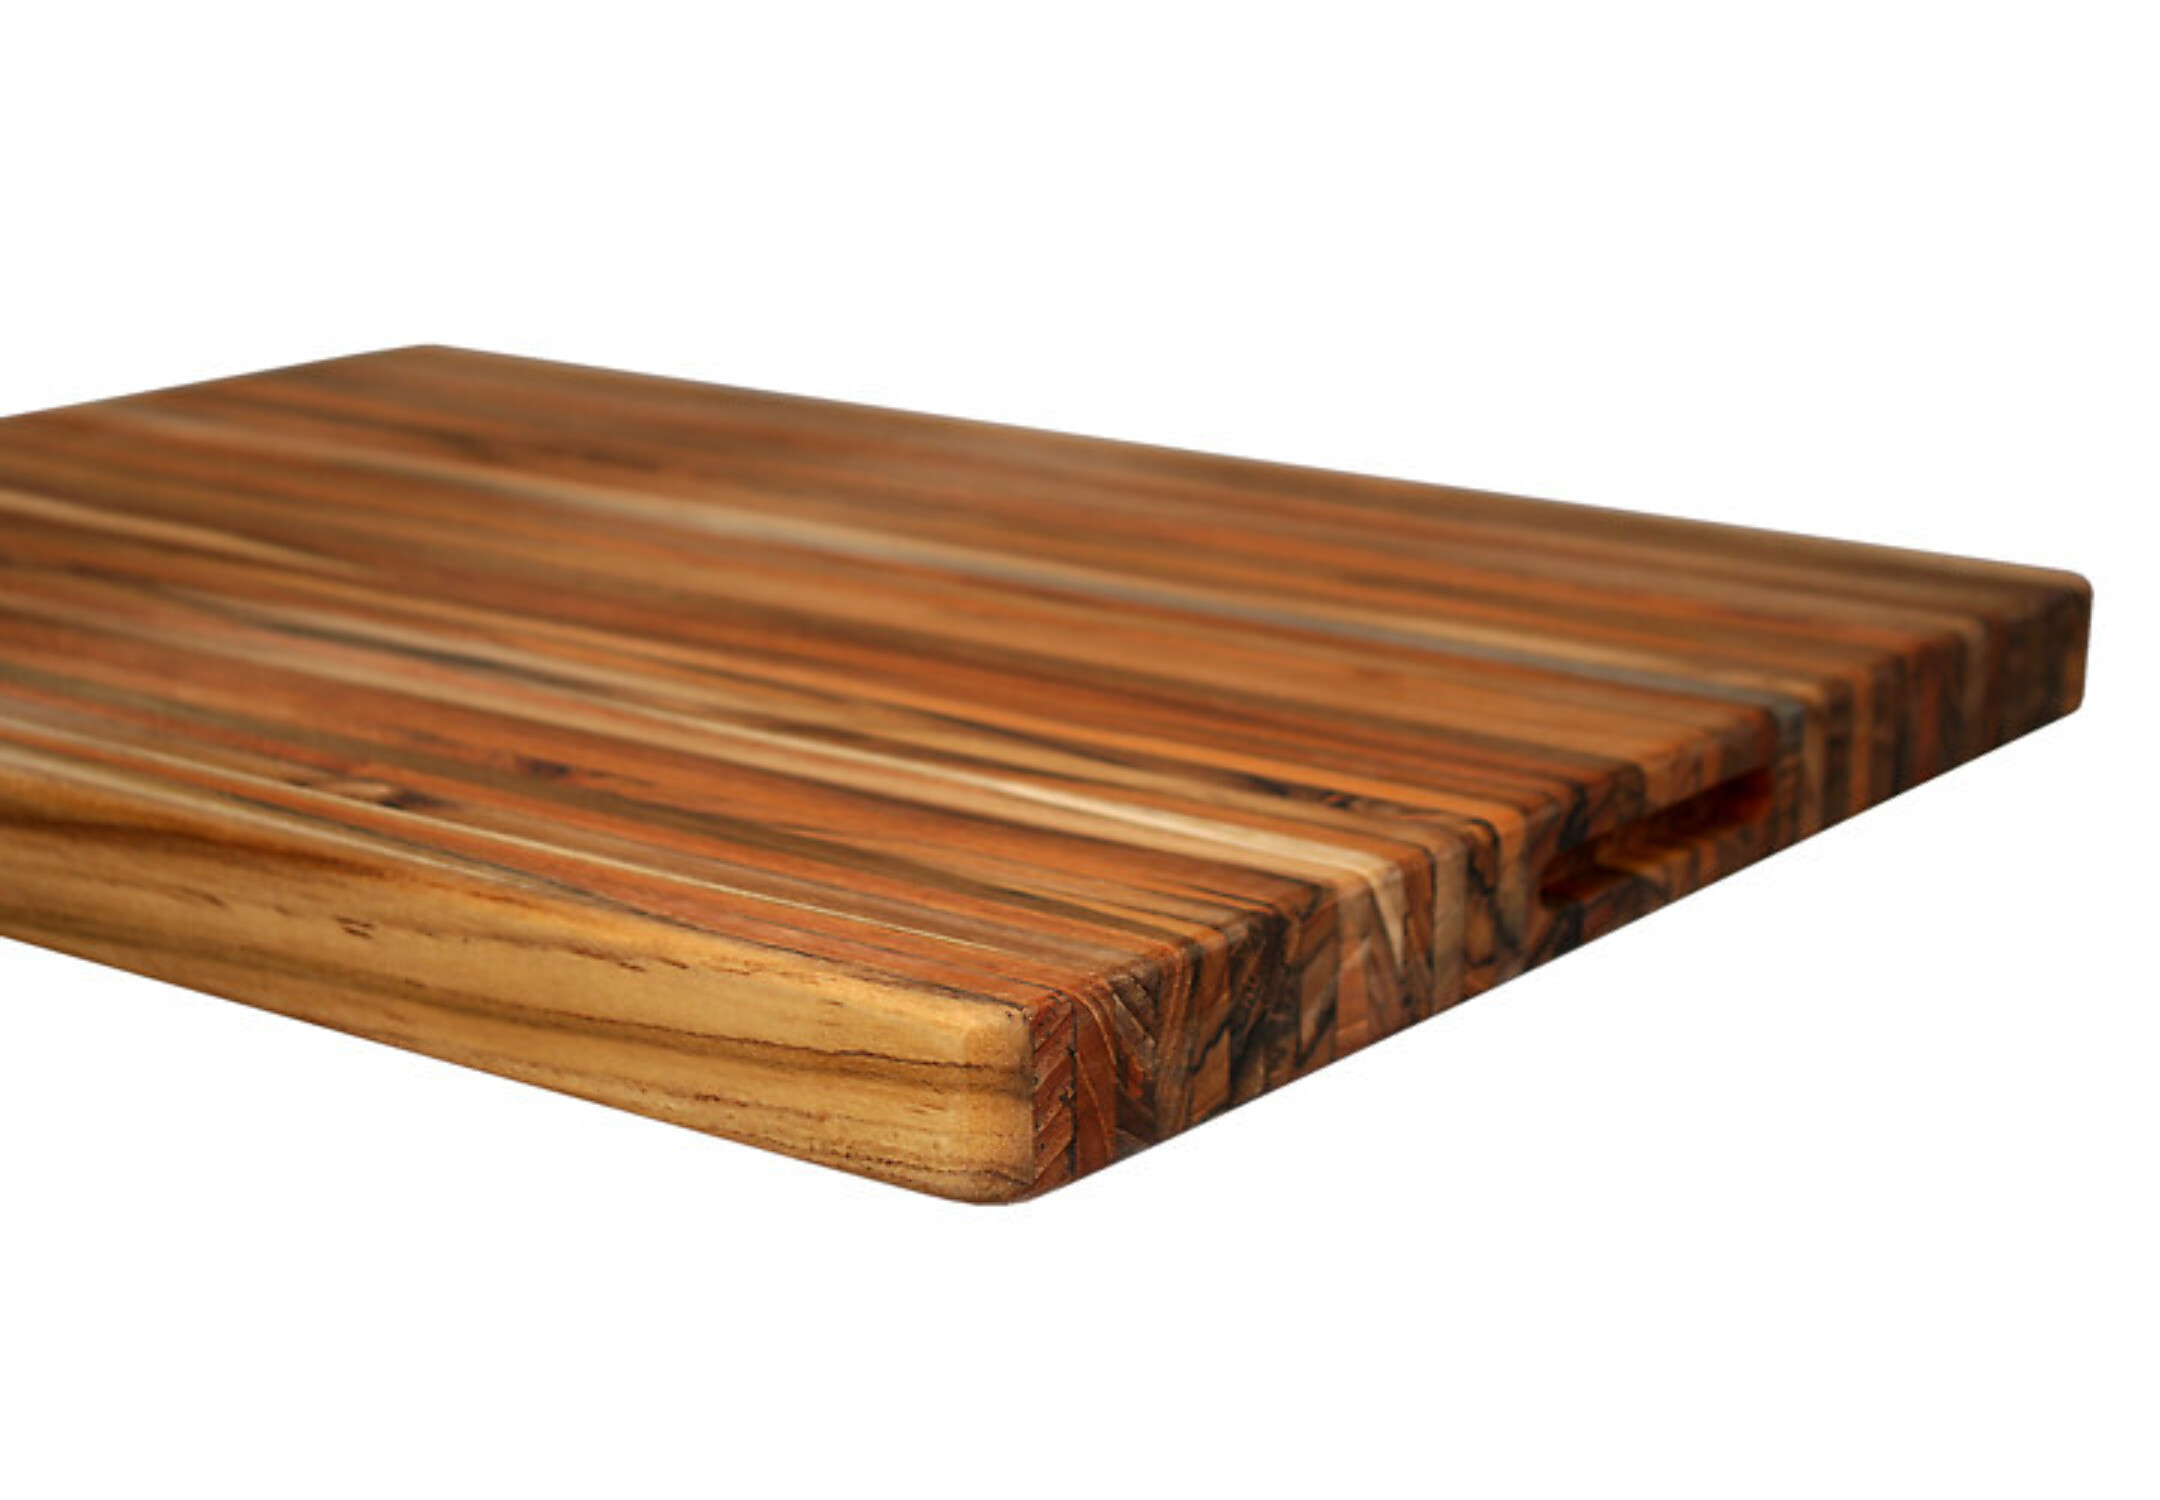 TeakHaus Edge Grain Carving Board w/Hand Grip (Rectangle) | 24" x 18" x 1.5" - image 5 of 6